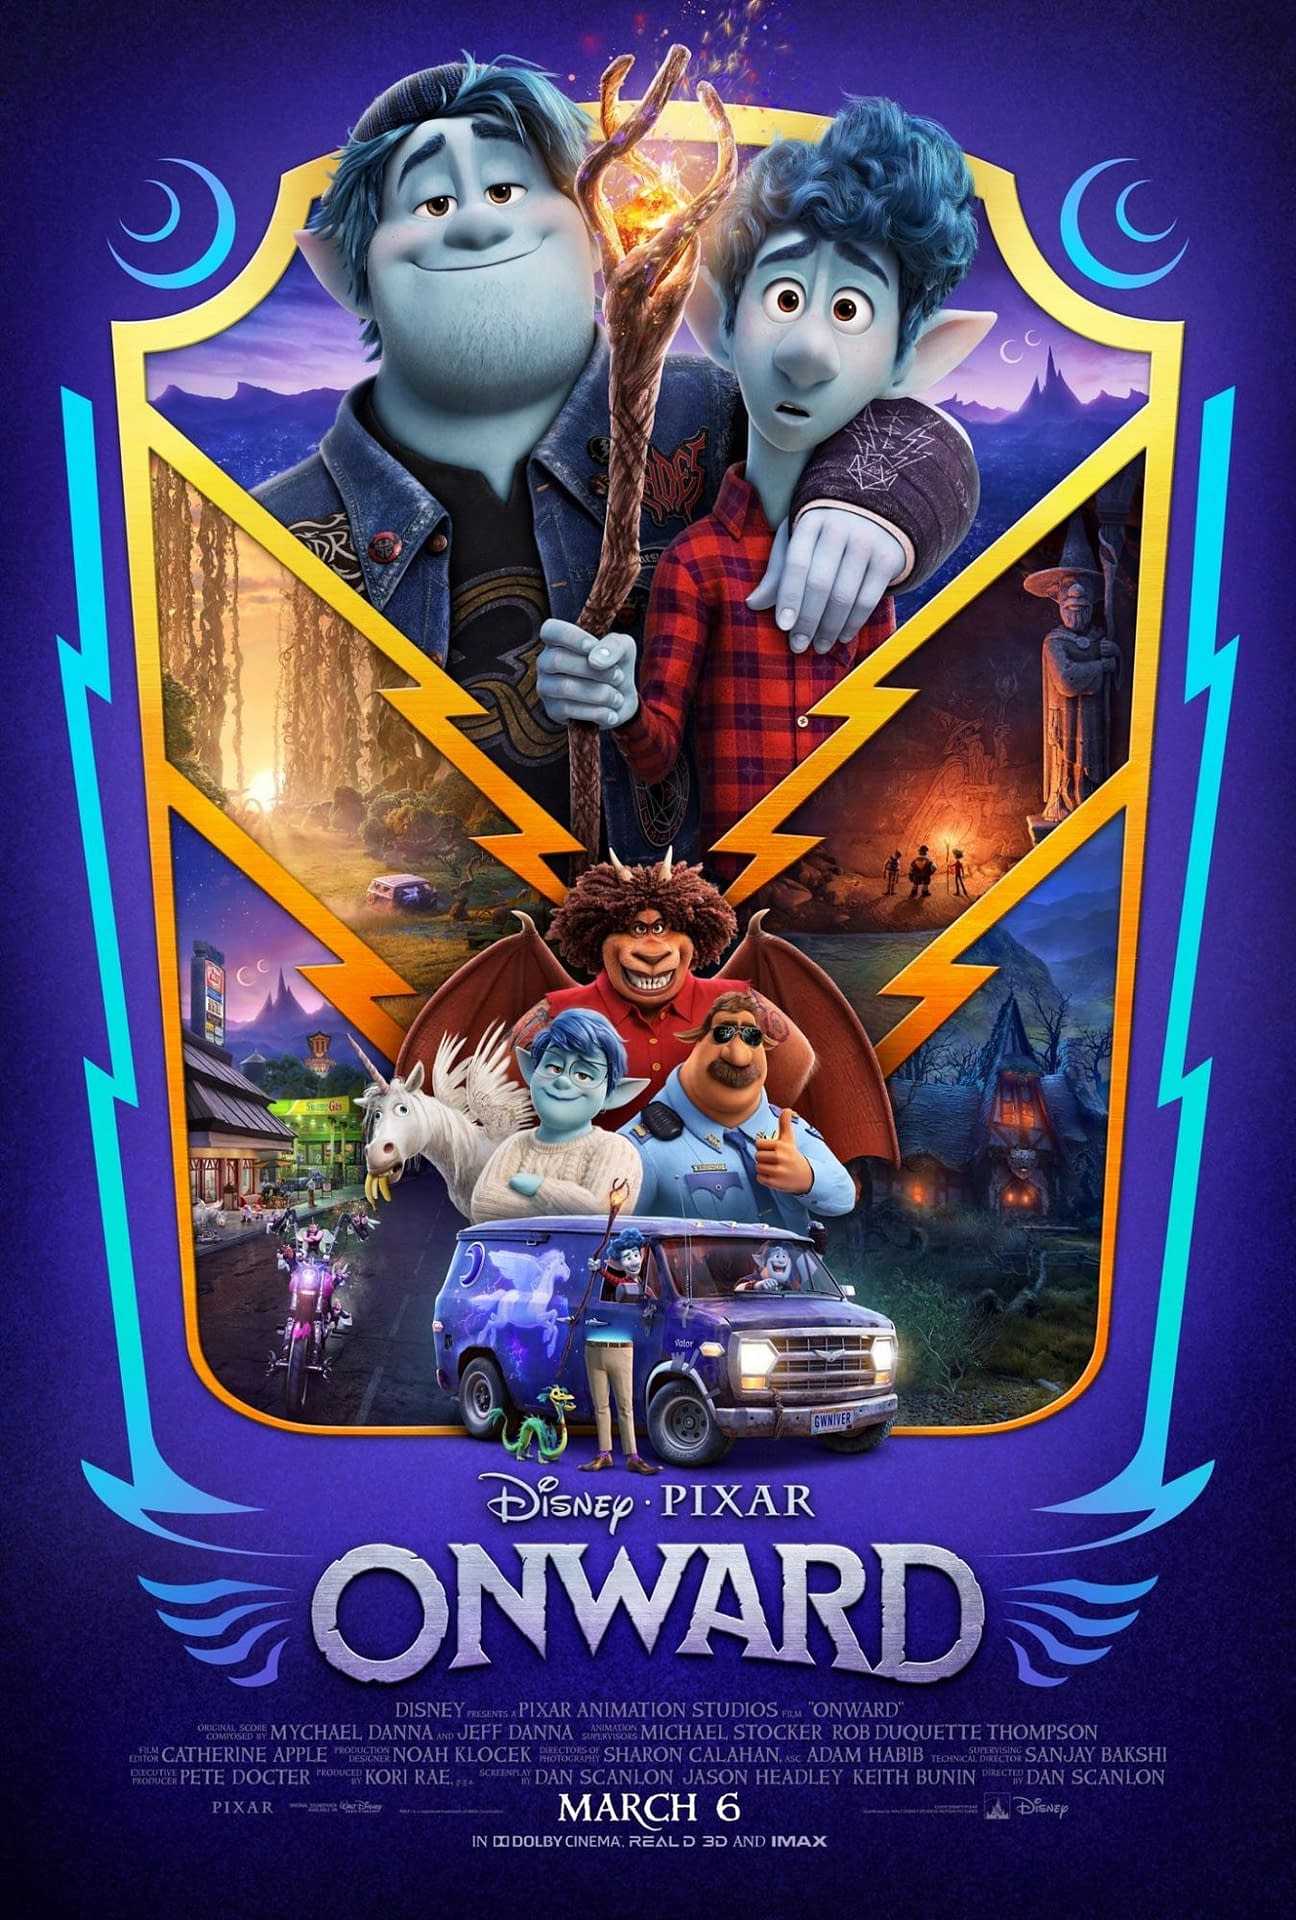 New Trailer and 5 New Posters for Pixar's "Onward"